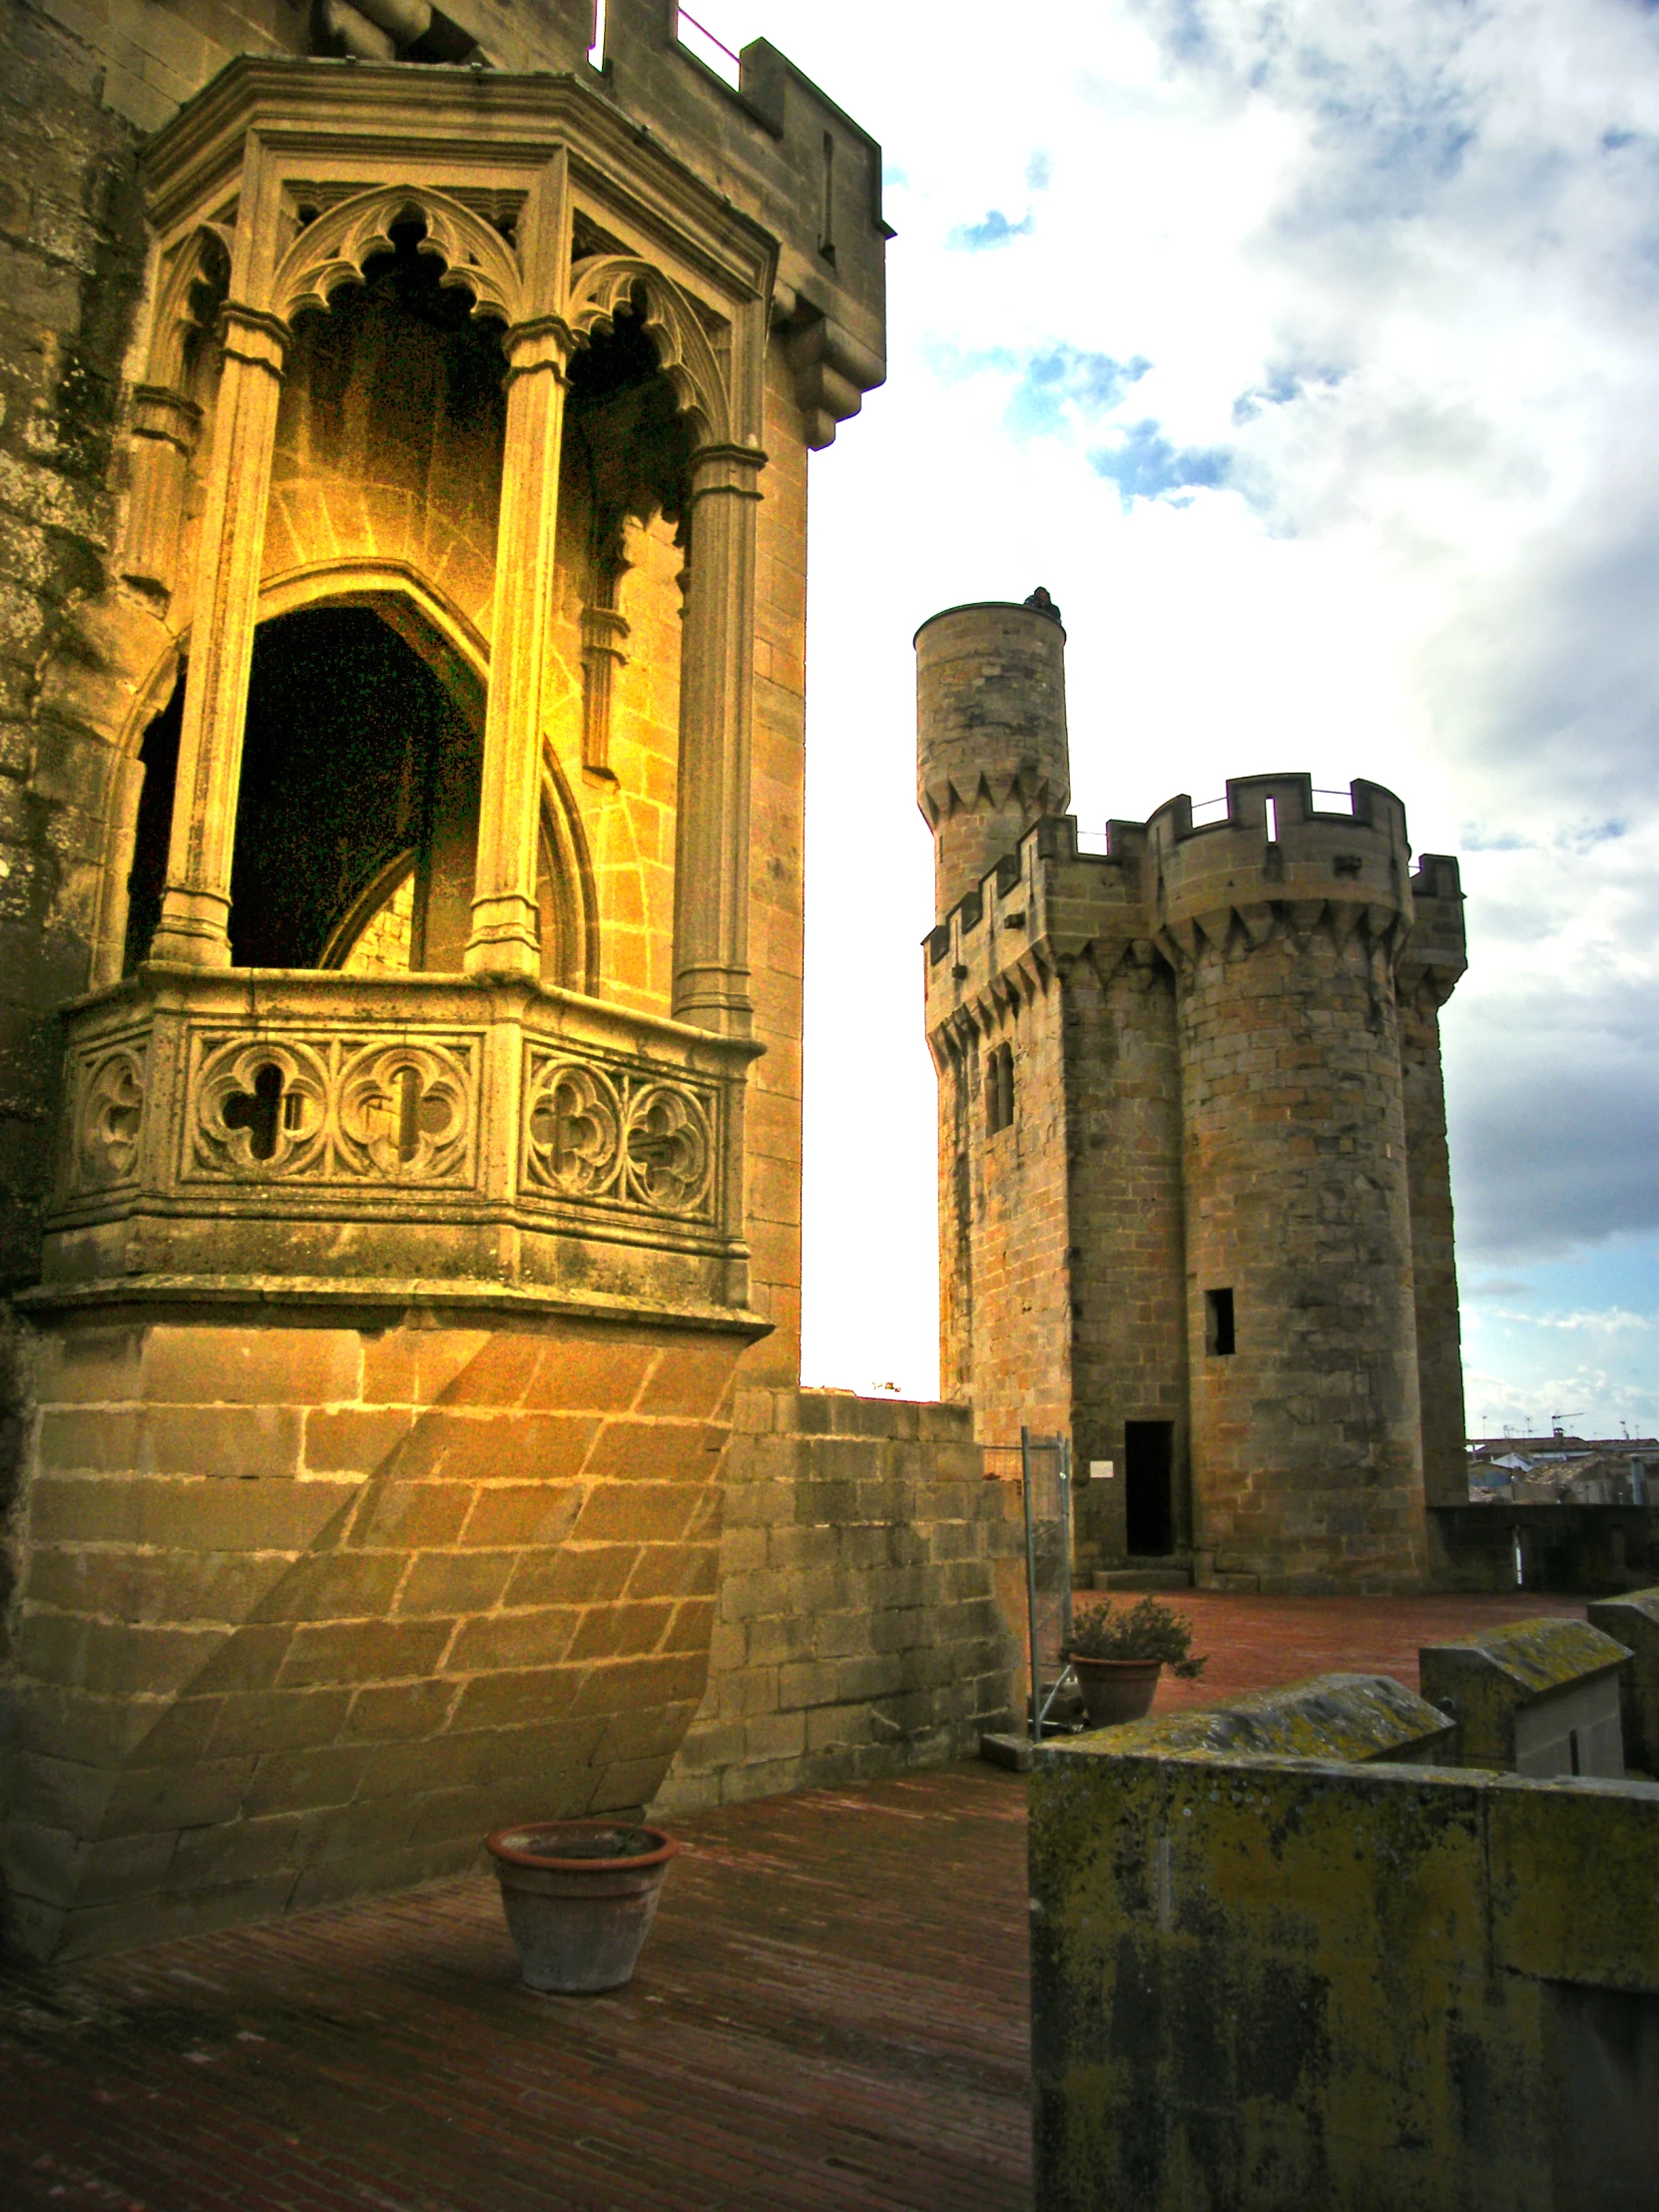 an old castle with a balcony and tower